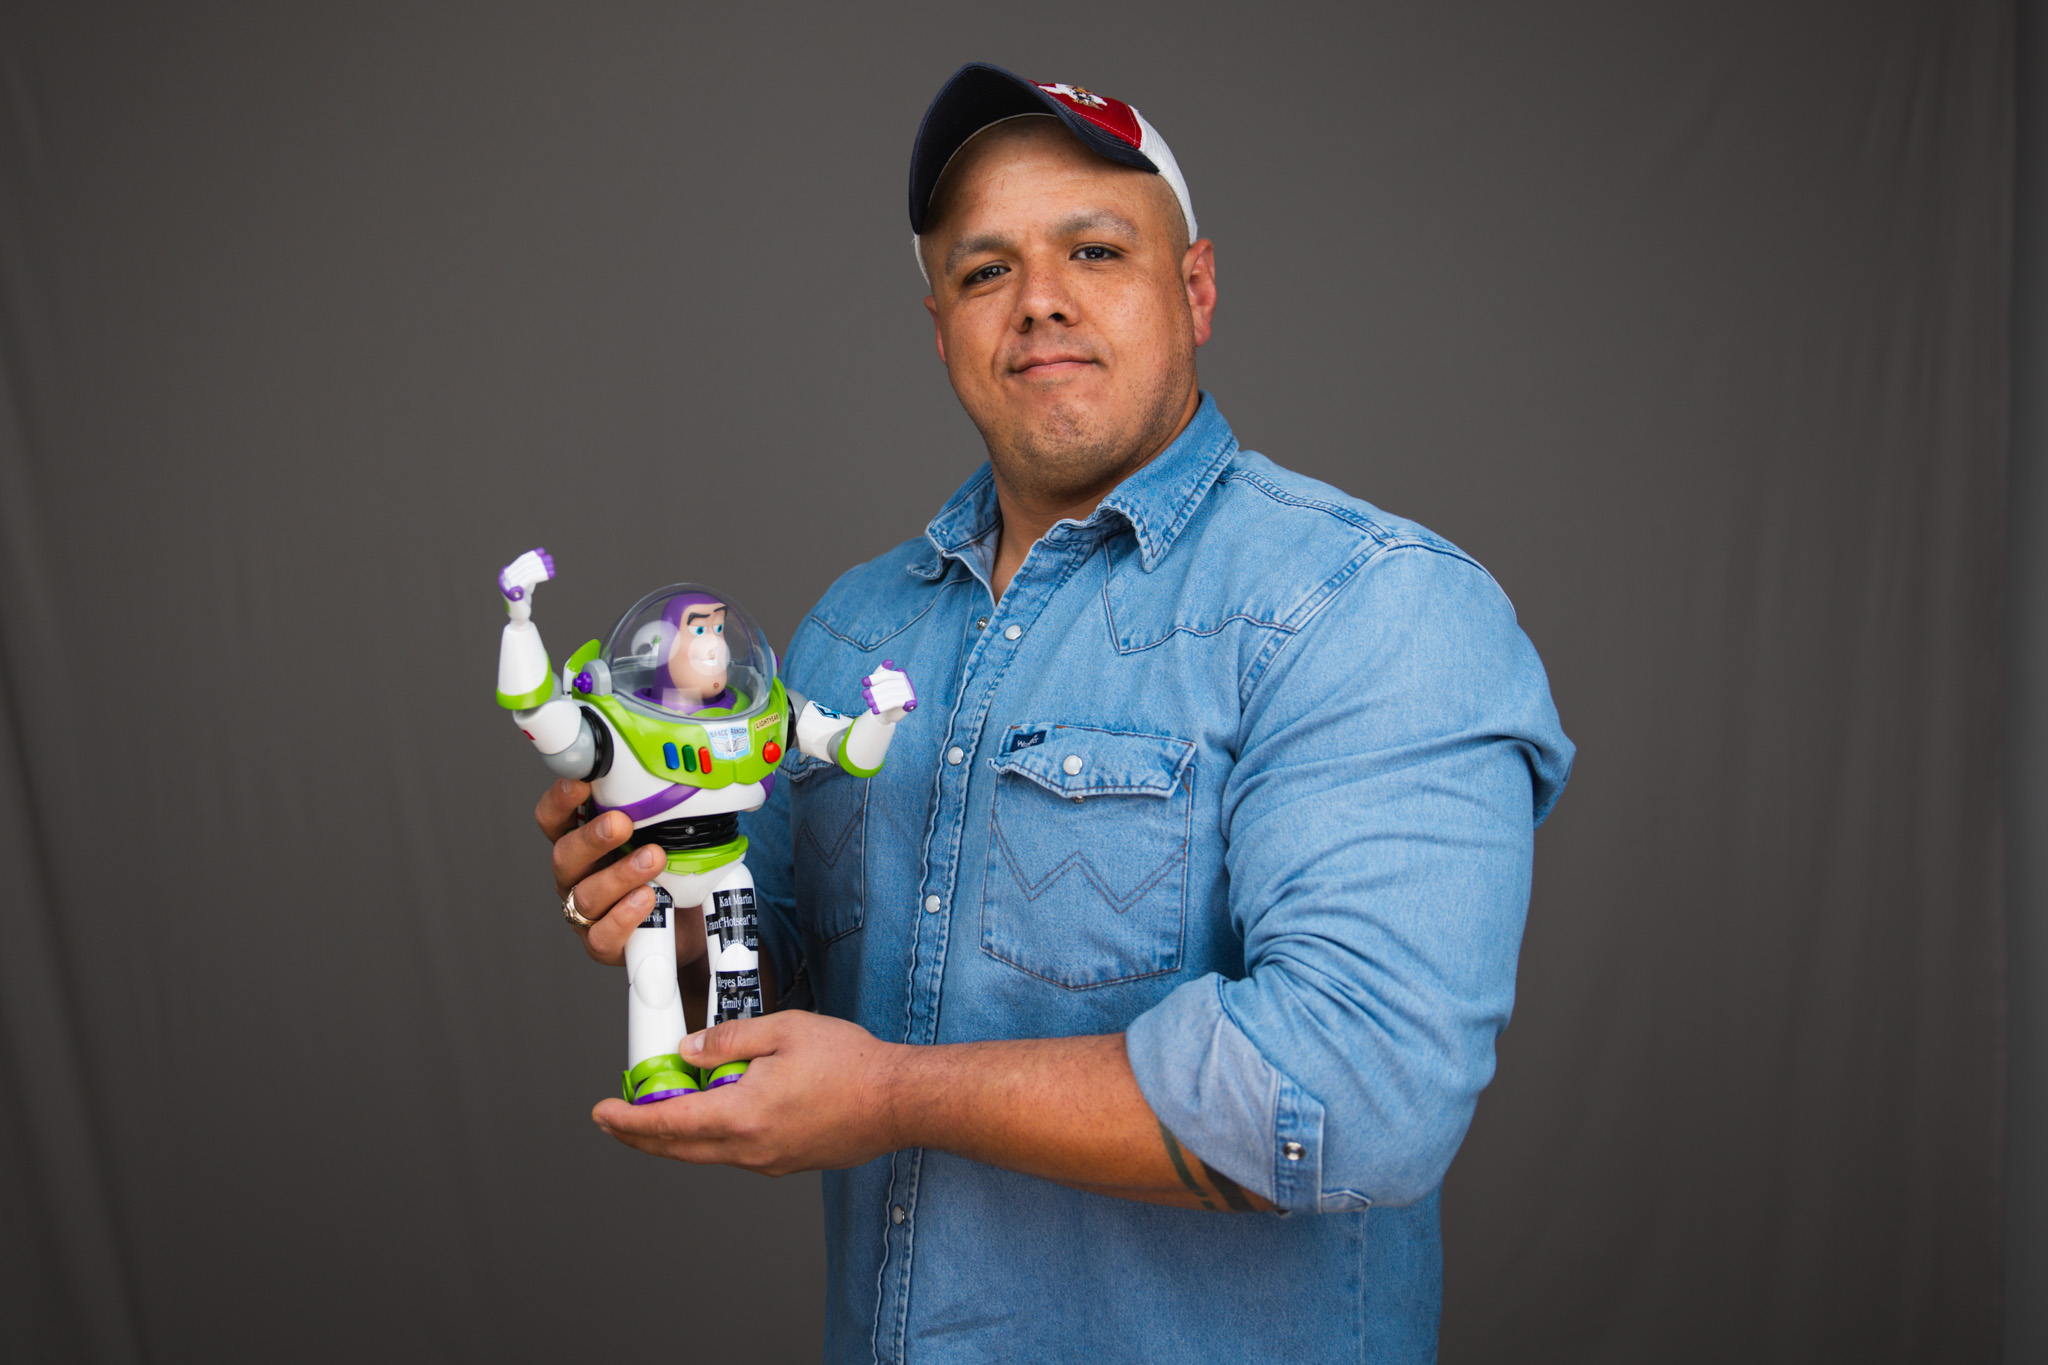 Video Communications Coordinator Chris Jarvis holding Buzz Lightyear figure against a gray backdrop